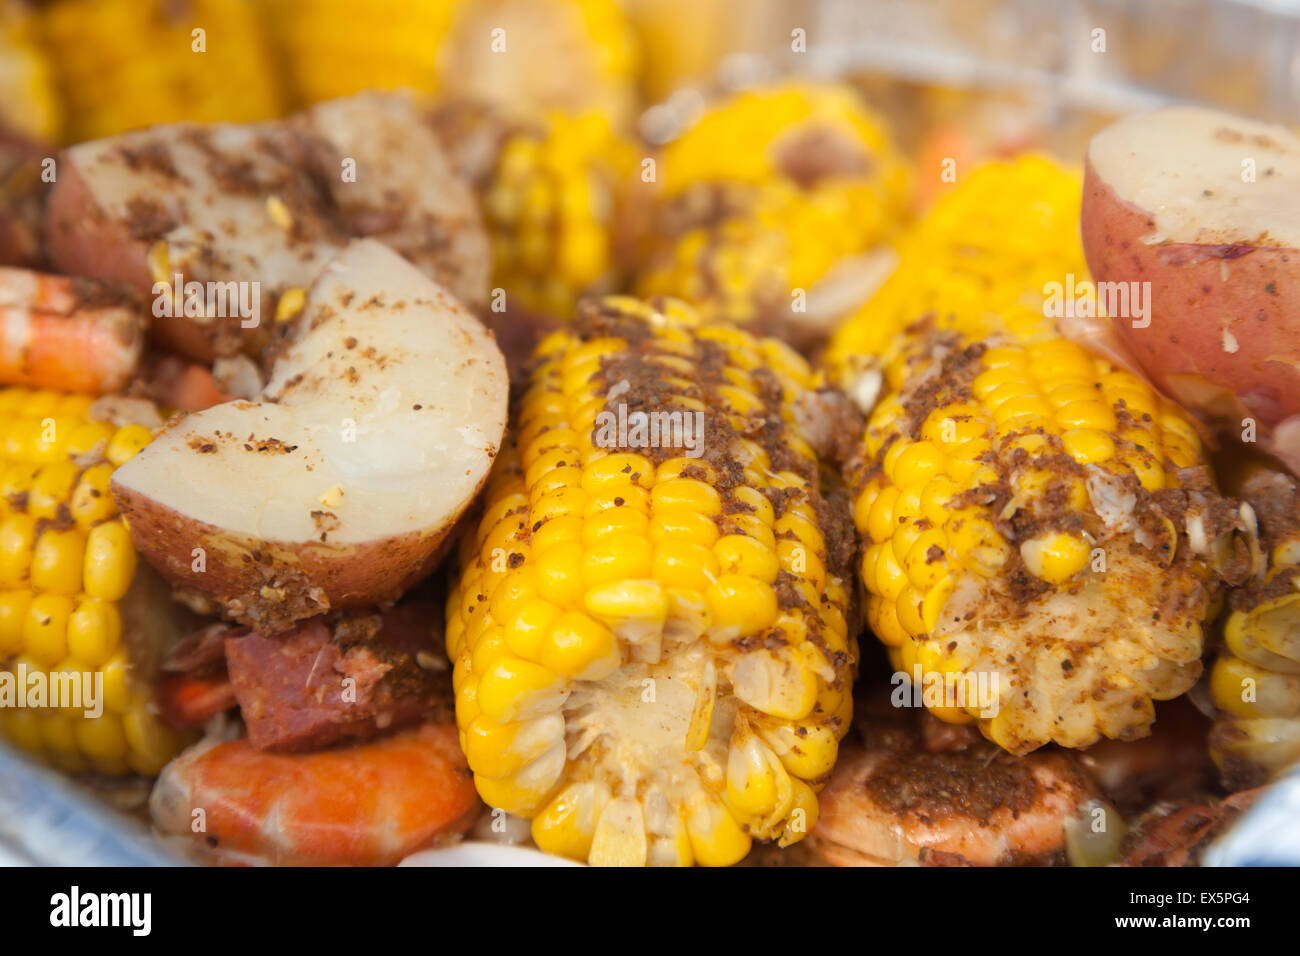 A traditional low country boil with red potatoes, corn on the cob, and shrimp. Stock Photo